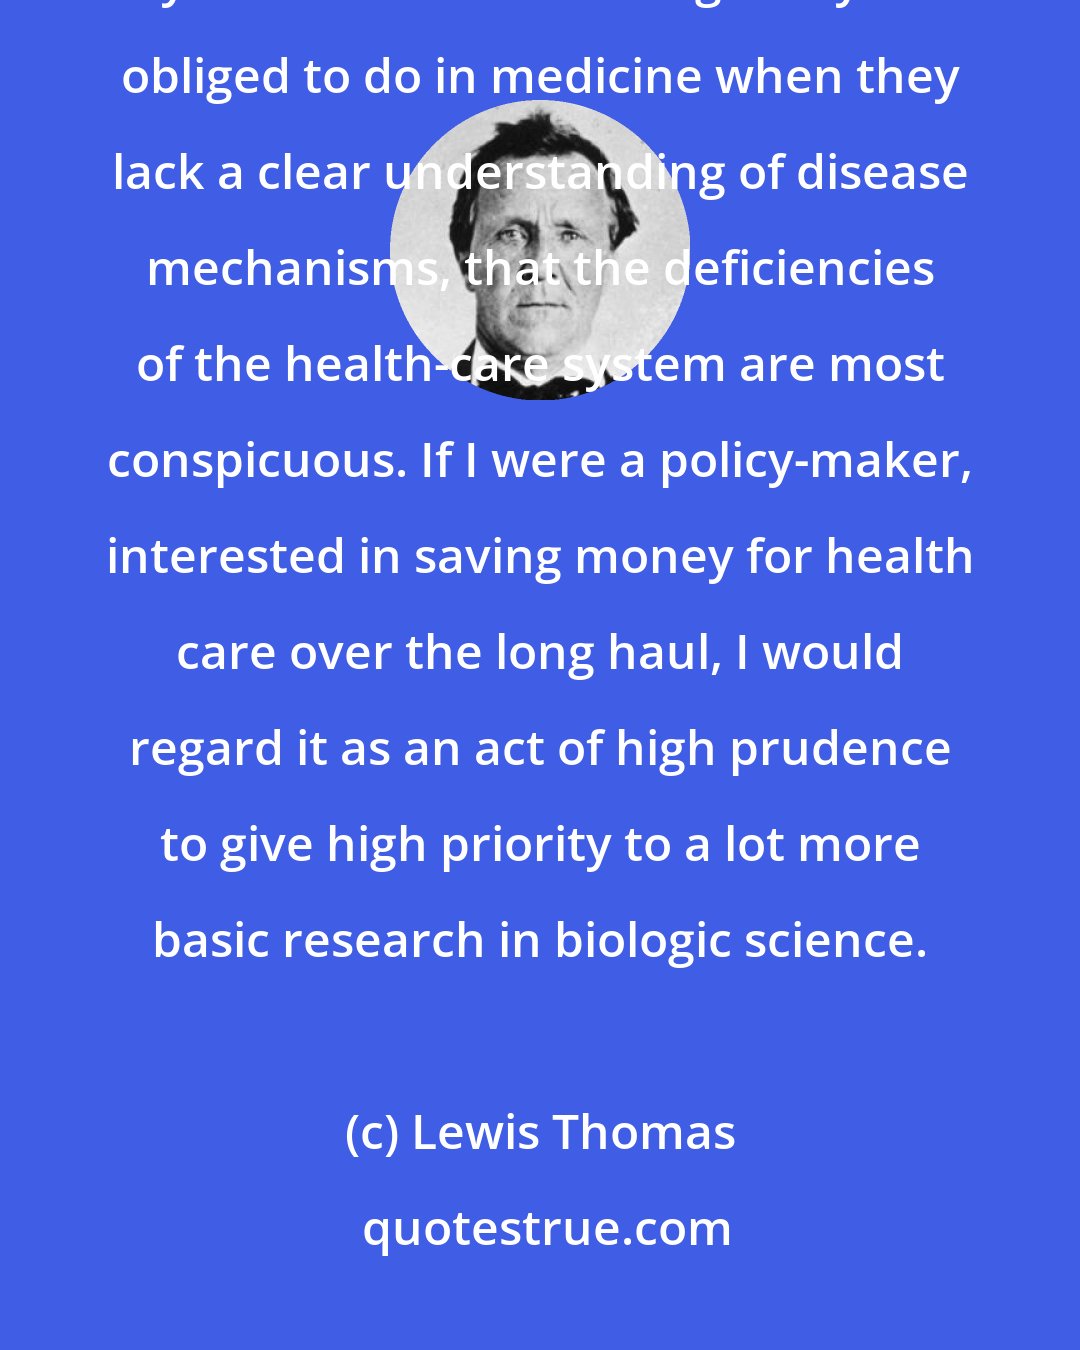 Lewis Thomas: It is when physicians are bogged down by their incomplete technologies, by the innumerable things they are obliged to do in medicine when they lack a clear understanding of disease mechanisms, that the deficiencies of the health-care system are most conspicuous. If I were a policy-maker, interested in saving money for health care over the long haul, I would regard it as an act of high prudence to give high priority to a lot more basic research in biologic science.